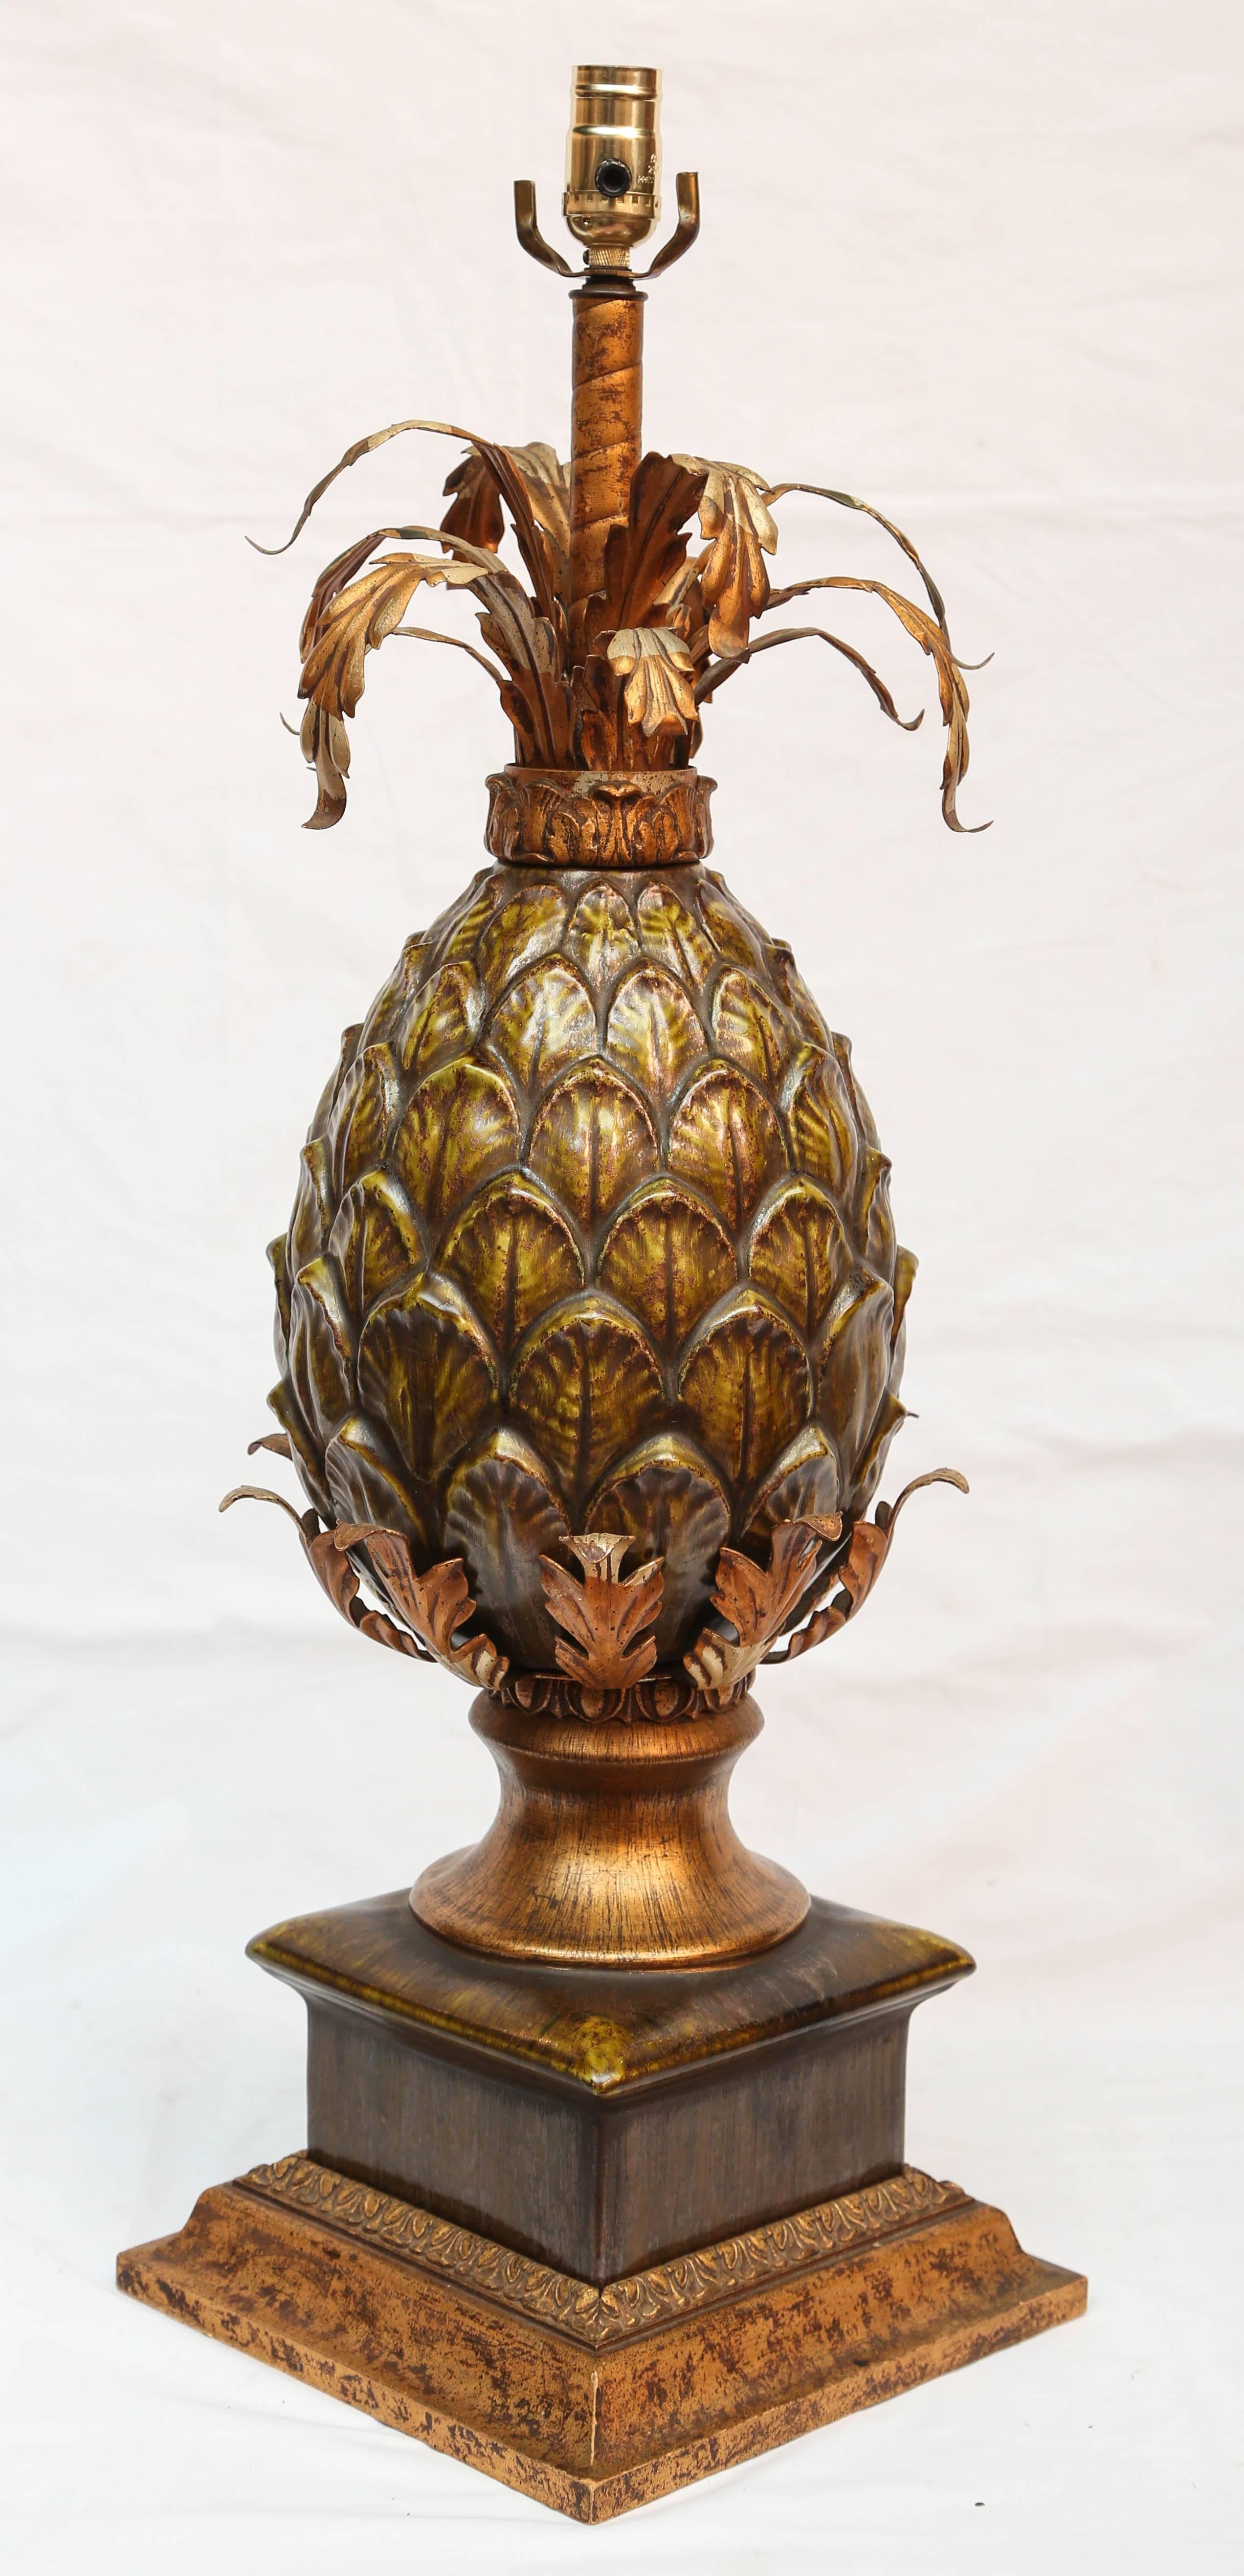 Grand scale with Majolica body and gilt metal details, on a wooden base.